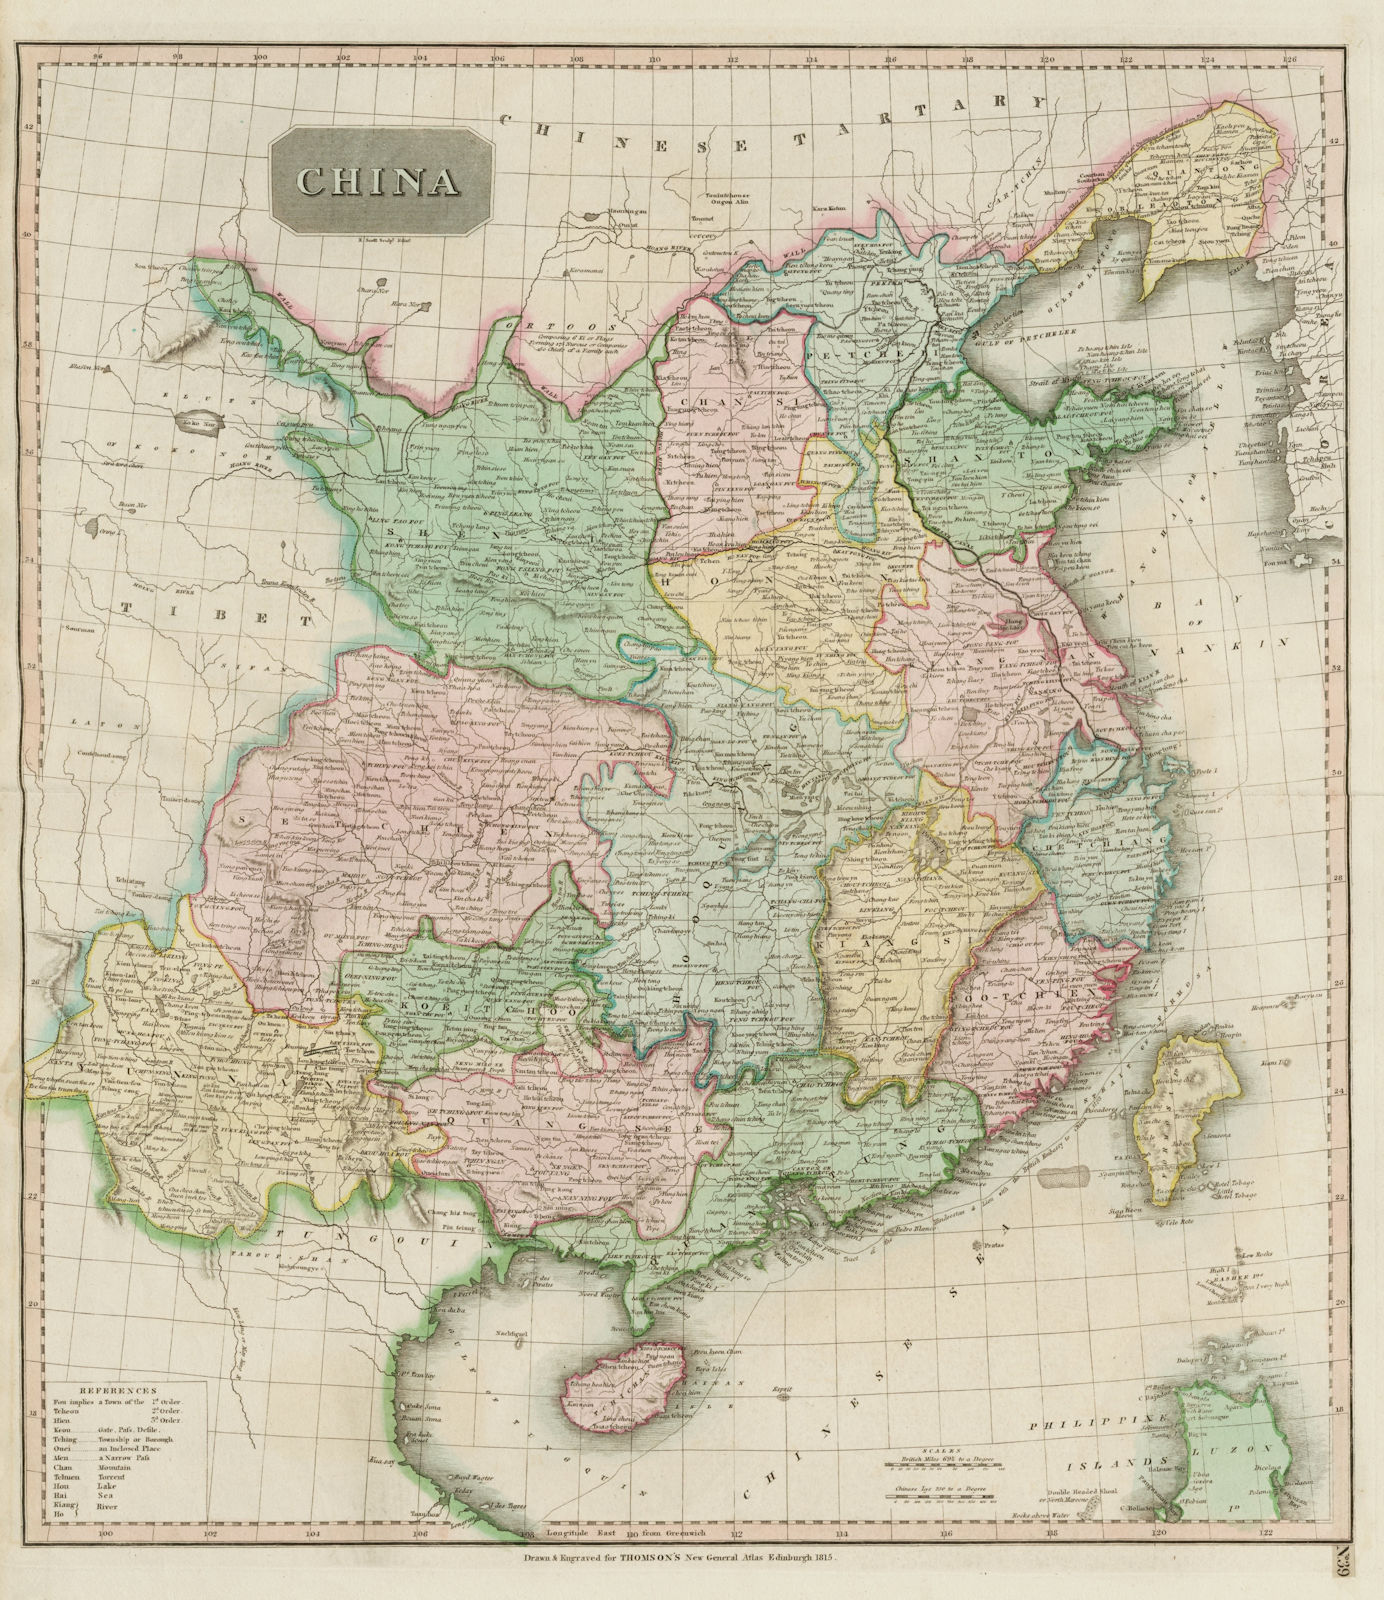 "China" showing route of George Macartney's Embassy in 1793. THOMSON 1817 map